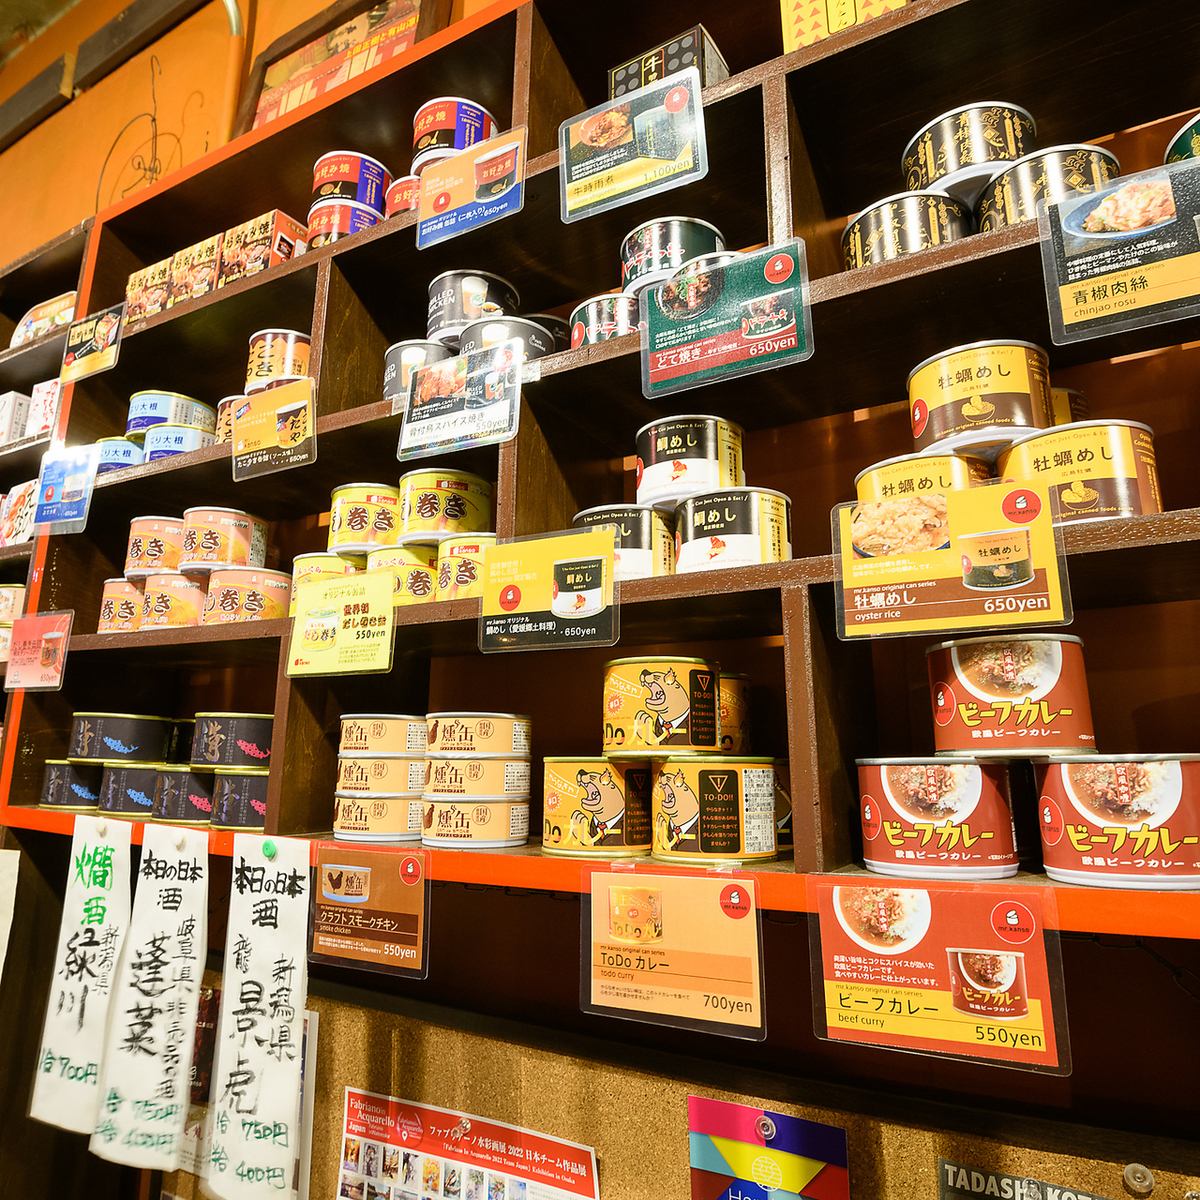 The walls are lined with colorful canned goods.One of the charms is the tasteful interior